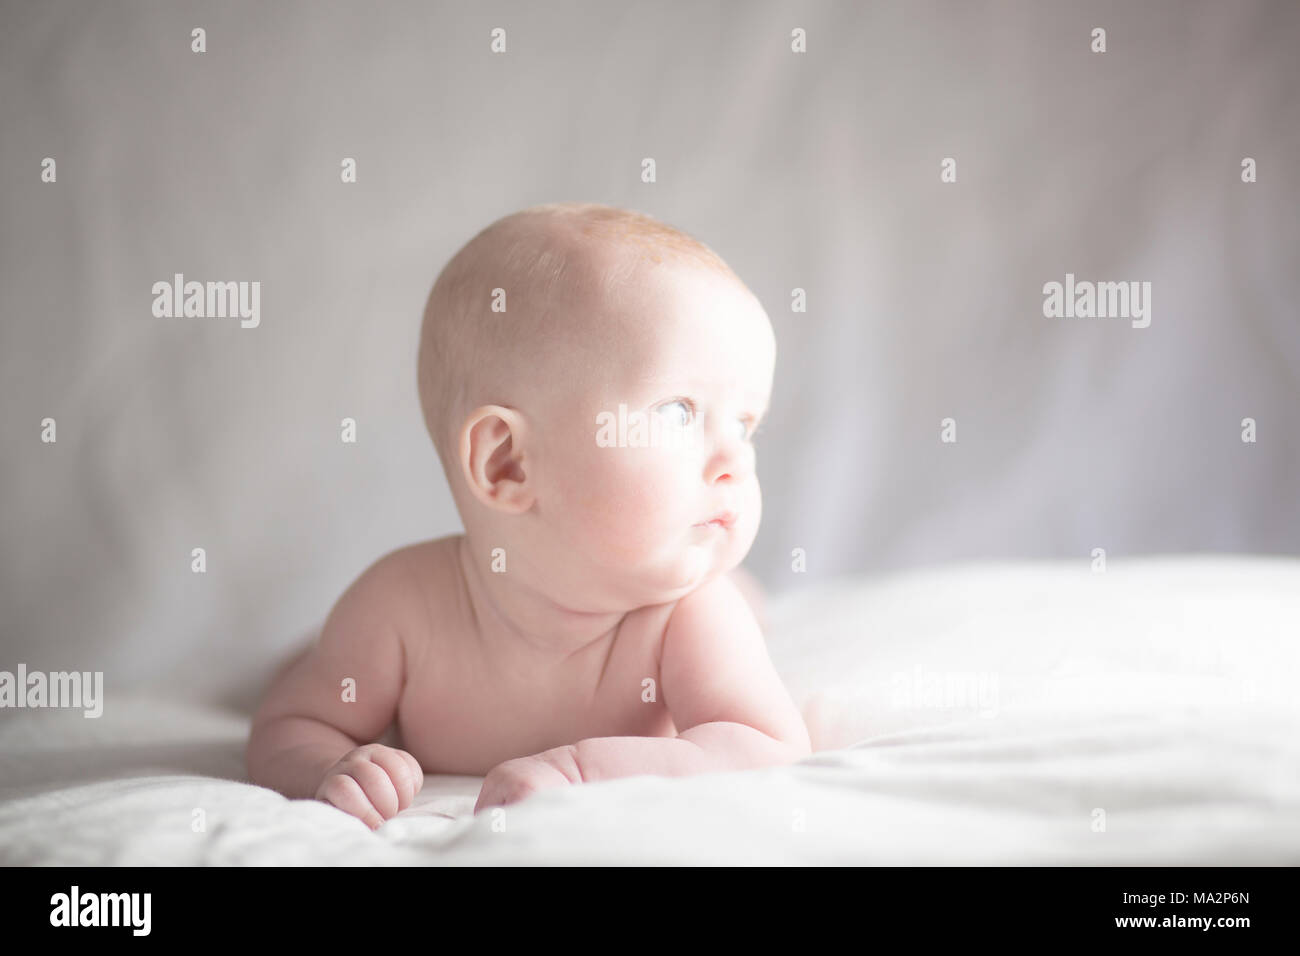 Very cute baby boy looking towards the light with contemplative expression Stock Photo